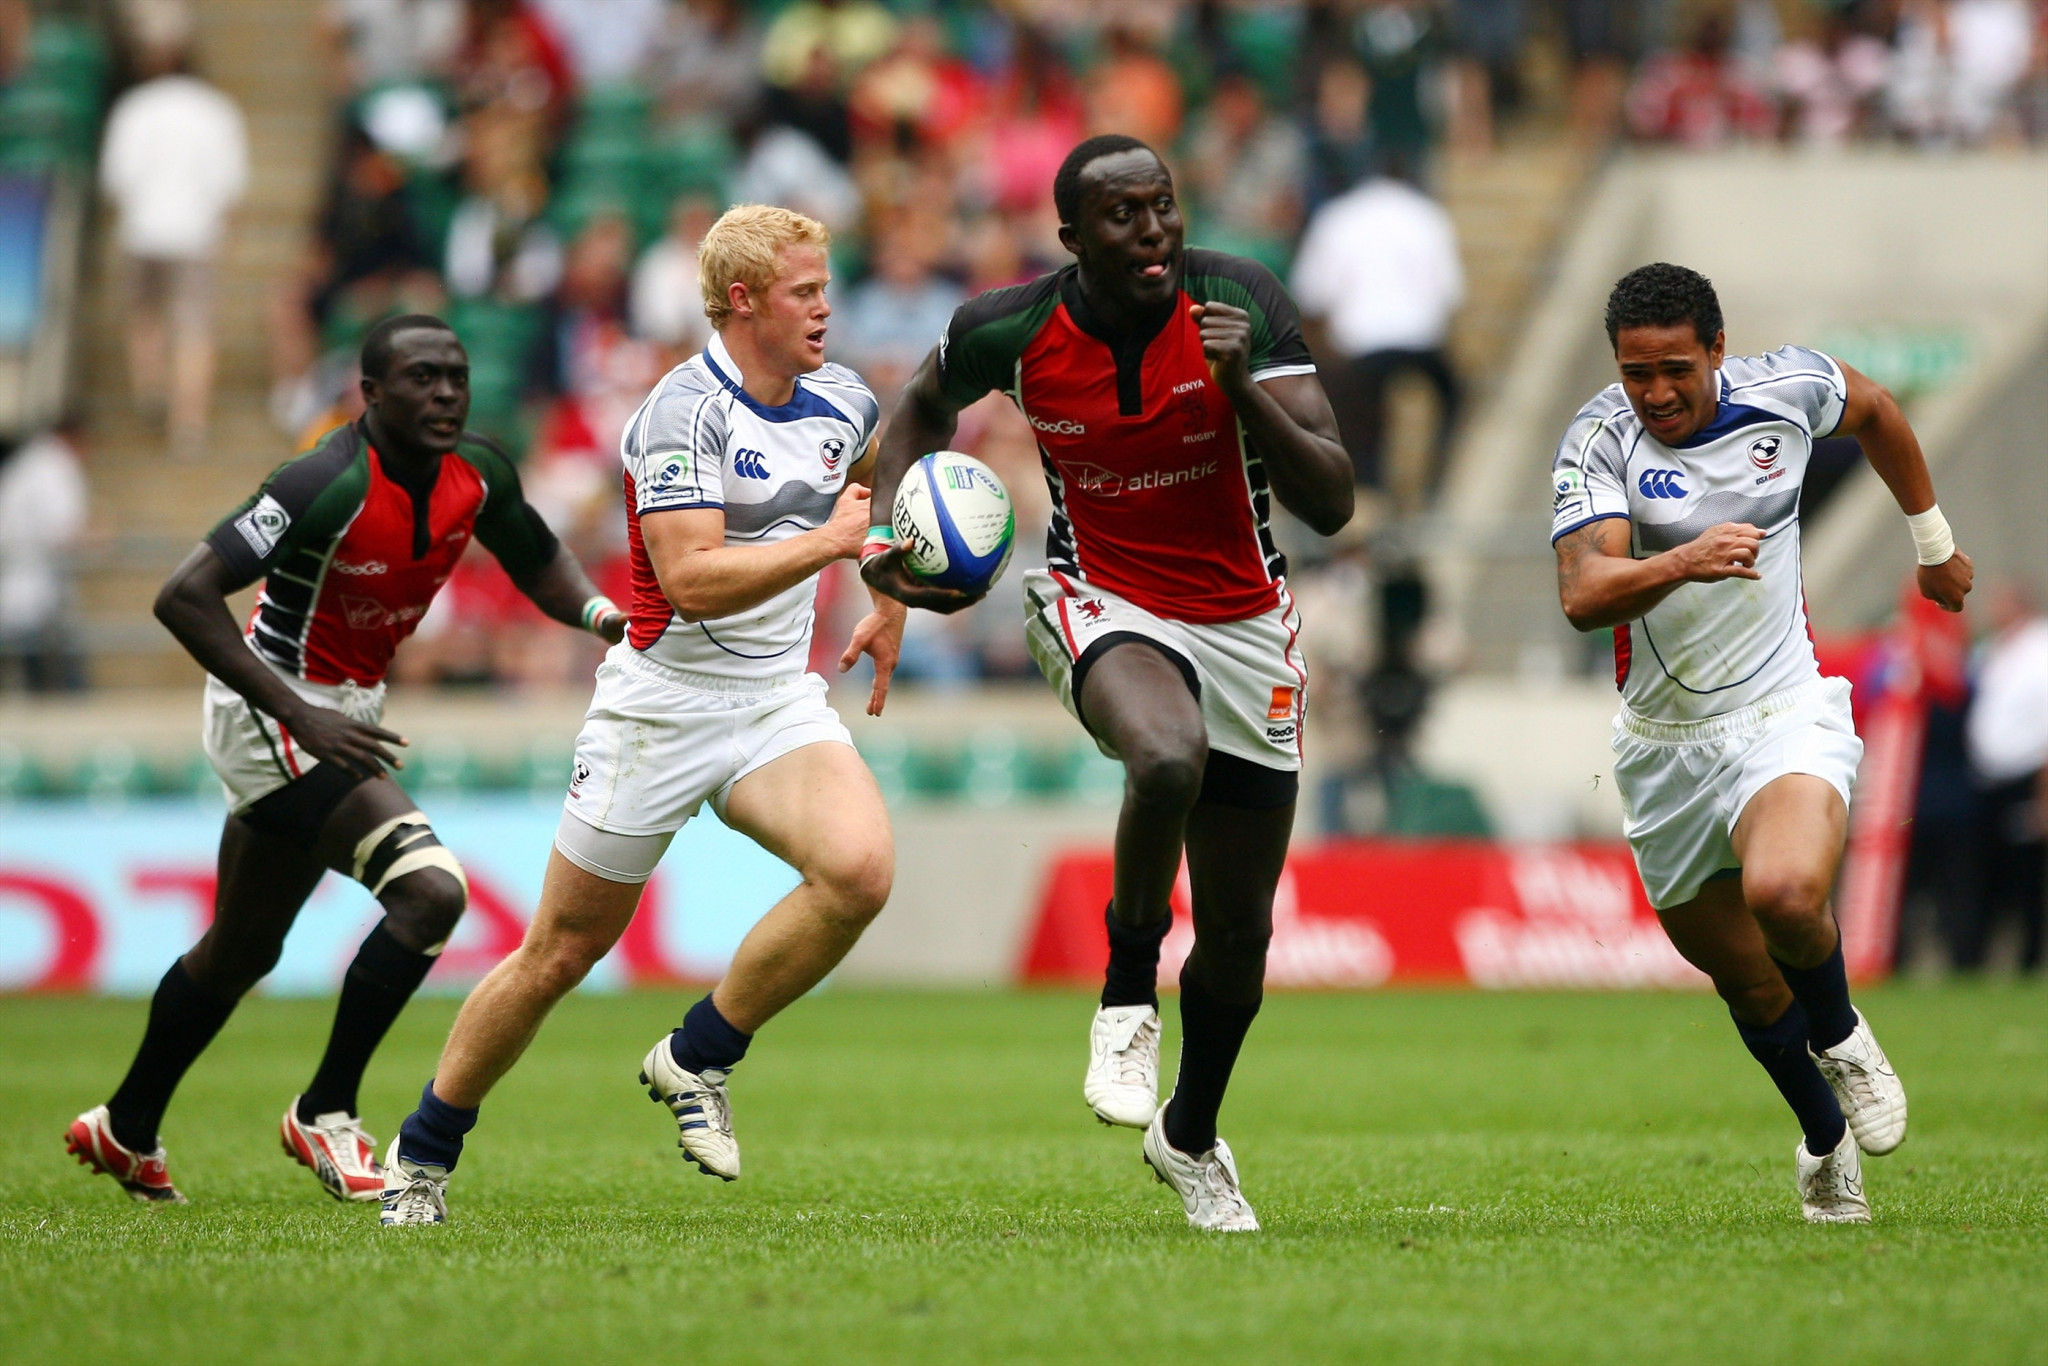 Humphrey Kayange is considered one of Kenya's greatest players and in 2009 was nominated for World Sevens Player of the Year after leading his side to the World Cup semi-final ©Getty Images